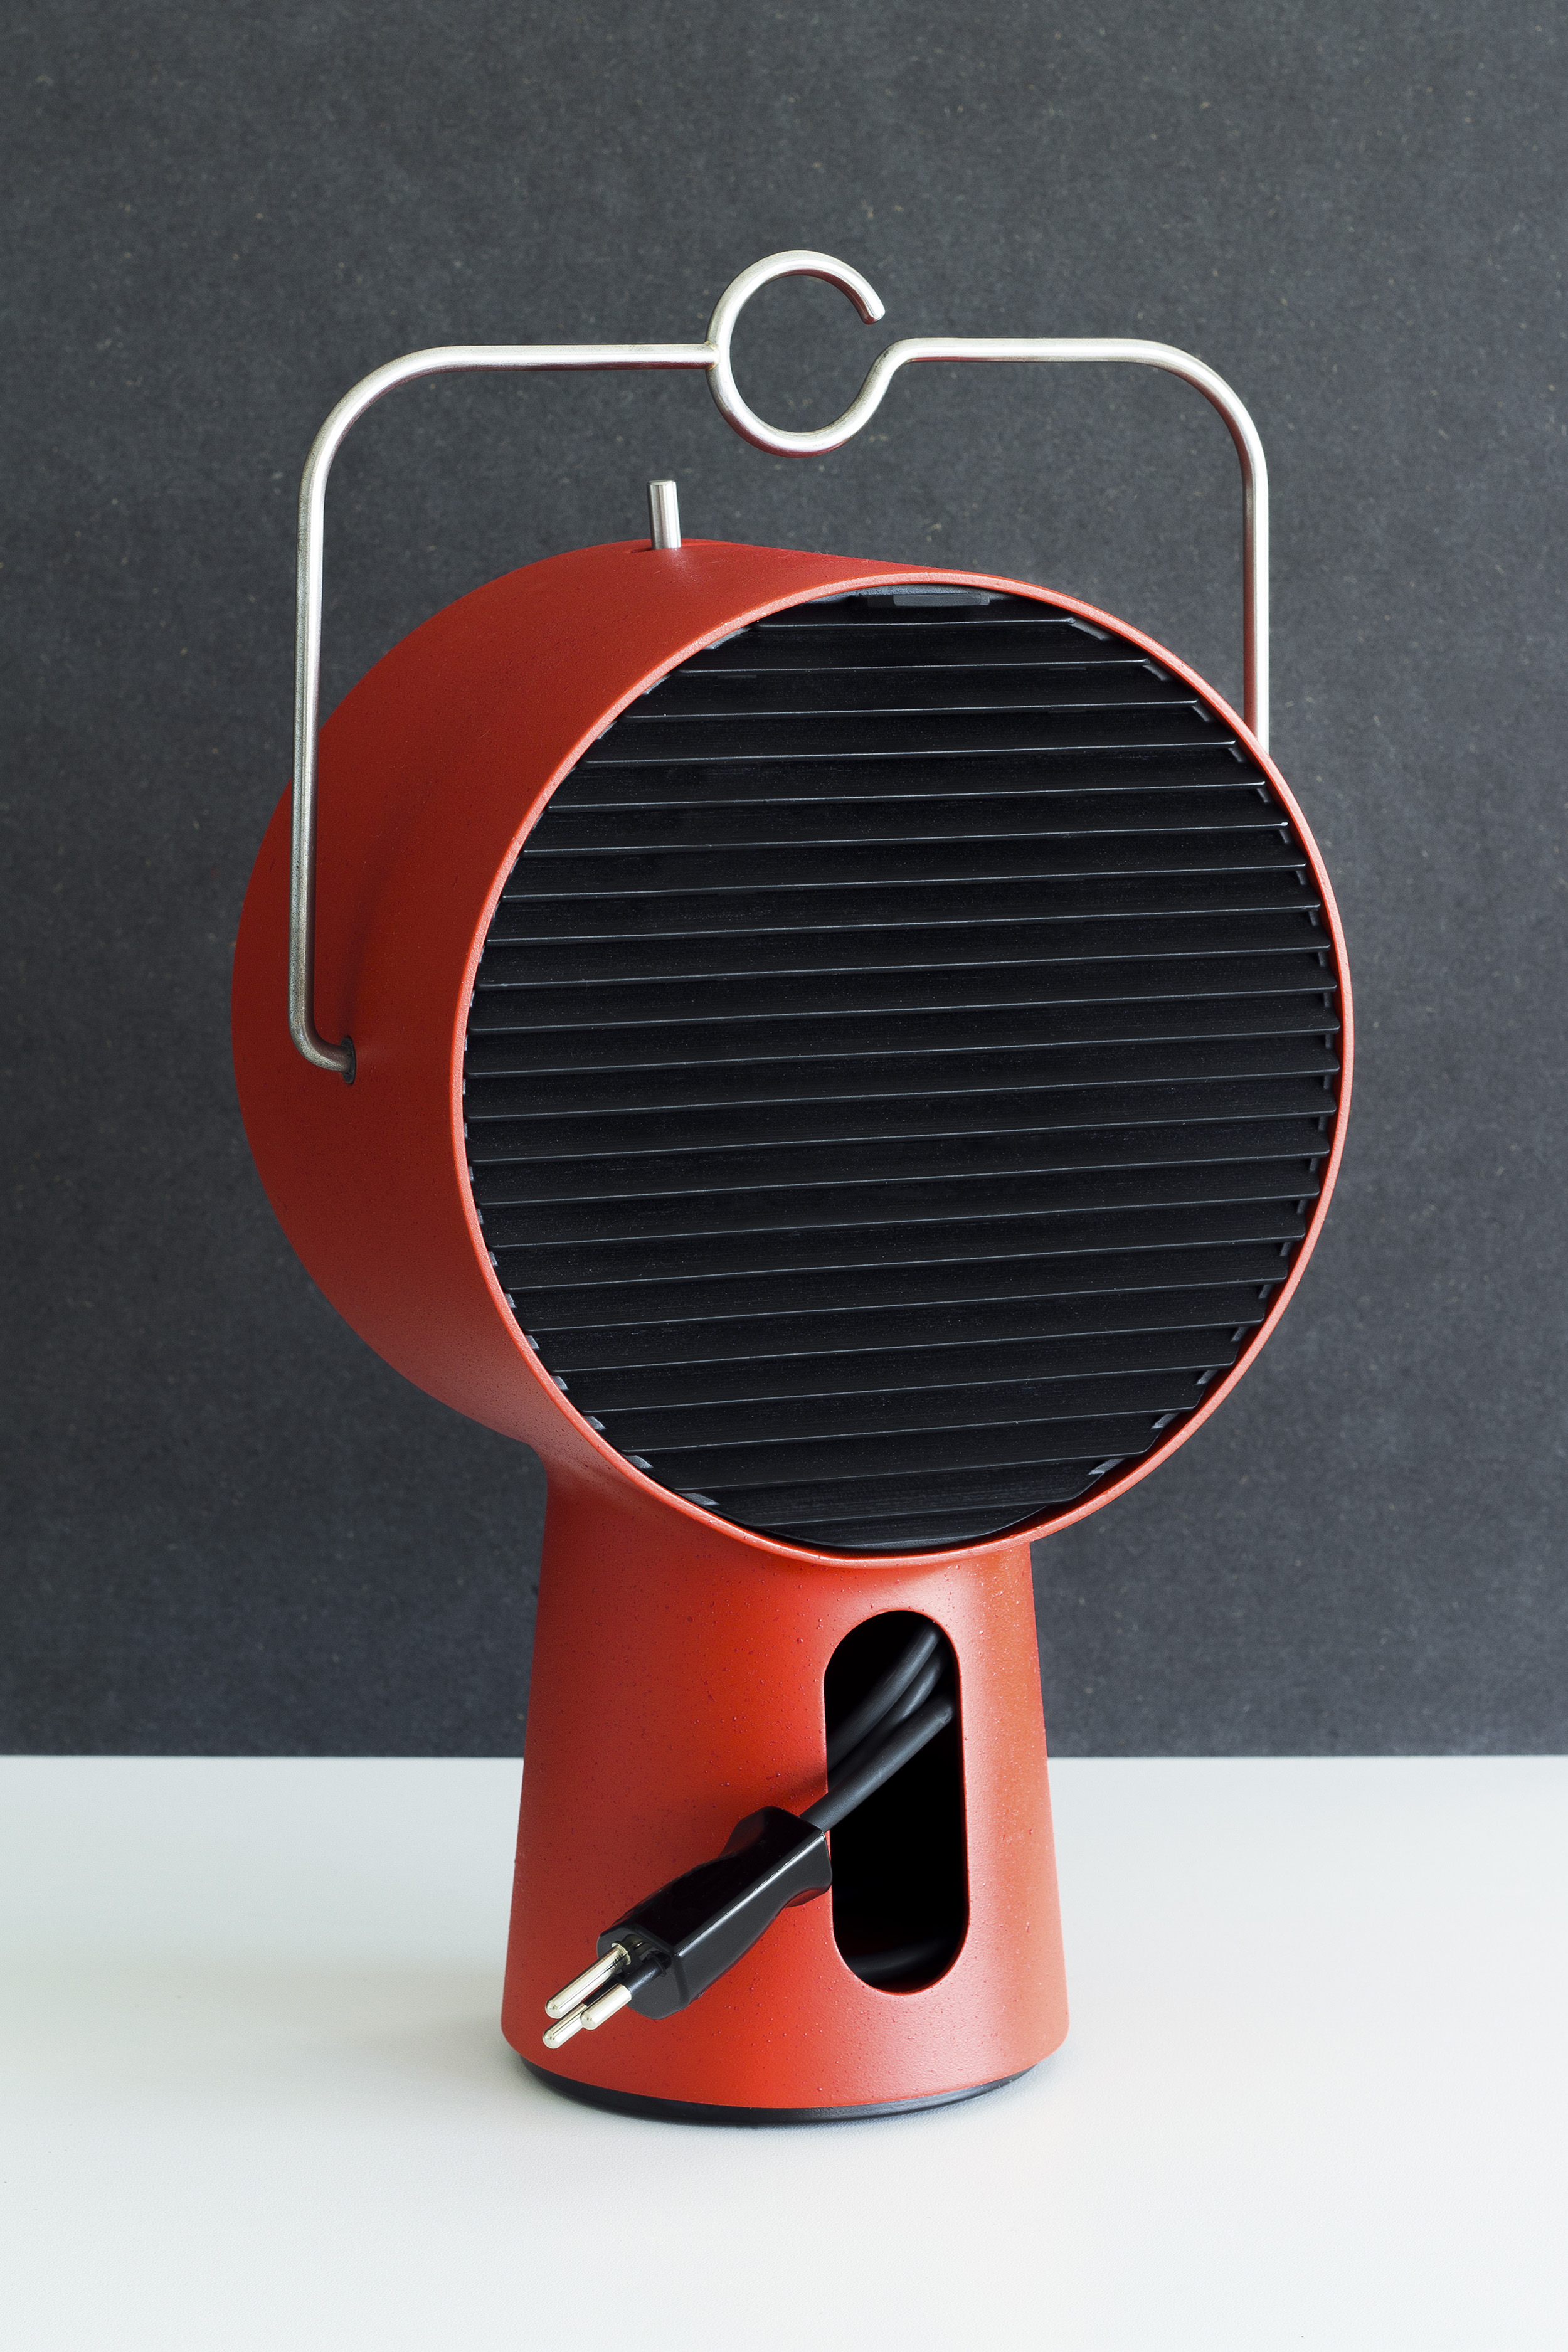 The Portable Kitchen Hood Maximeaugay